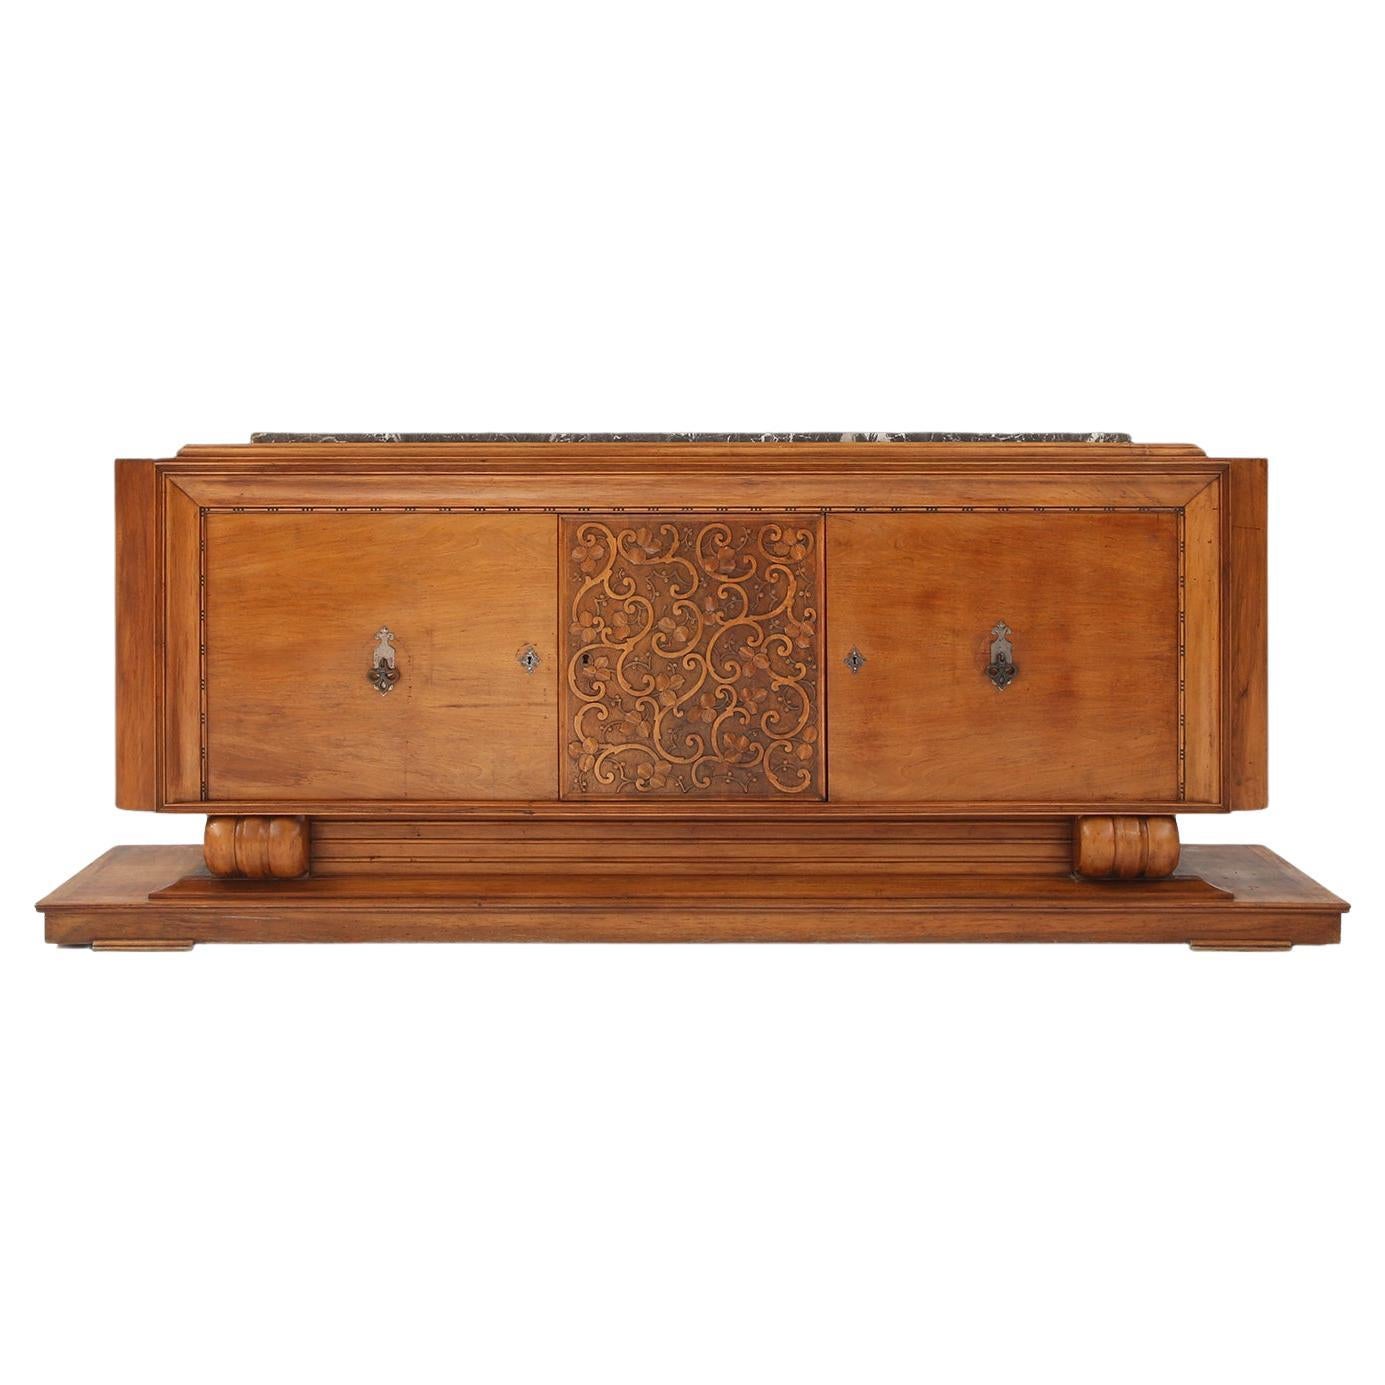 French Art Deco Sideboard in Oak with Grey Marble Top